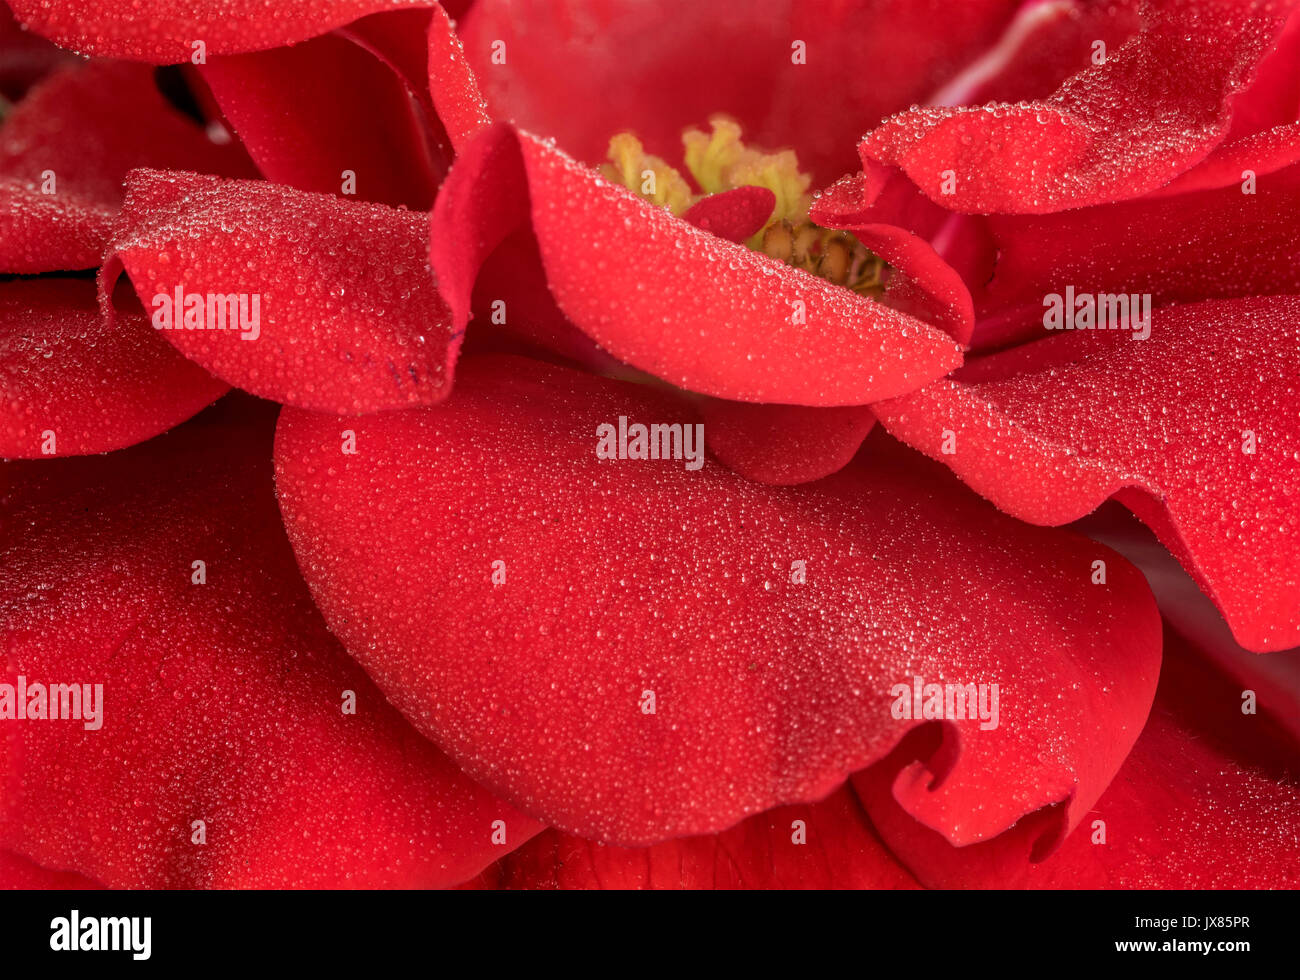 Texture and pattern of a rose flower petal, closeup macro, with small rain water droplets on it, showing many layers of petals, and the flower yellow Stock Photo